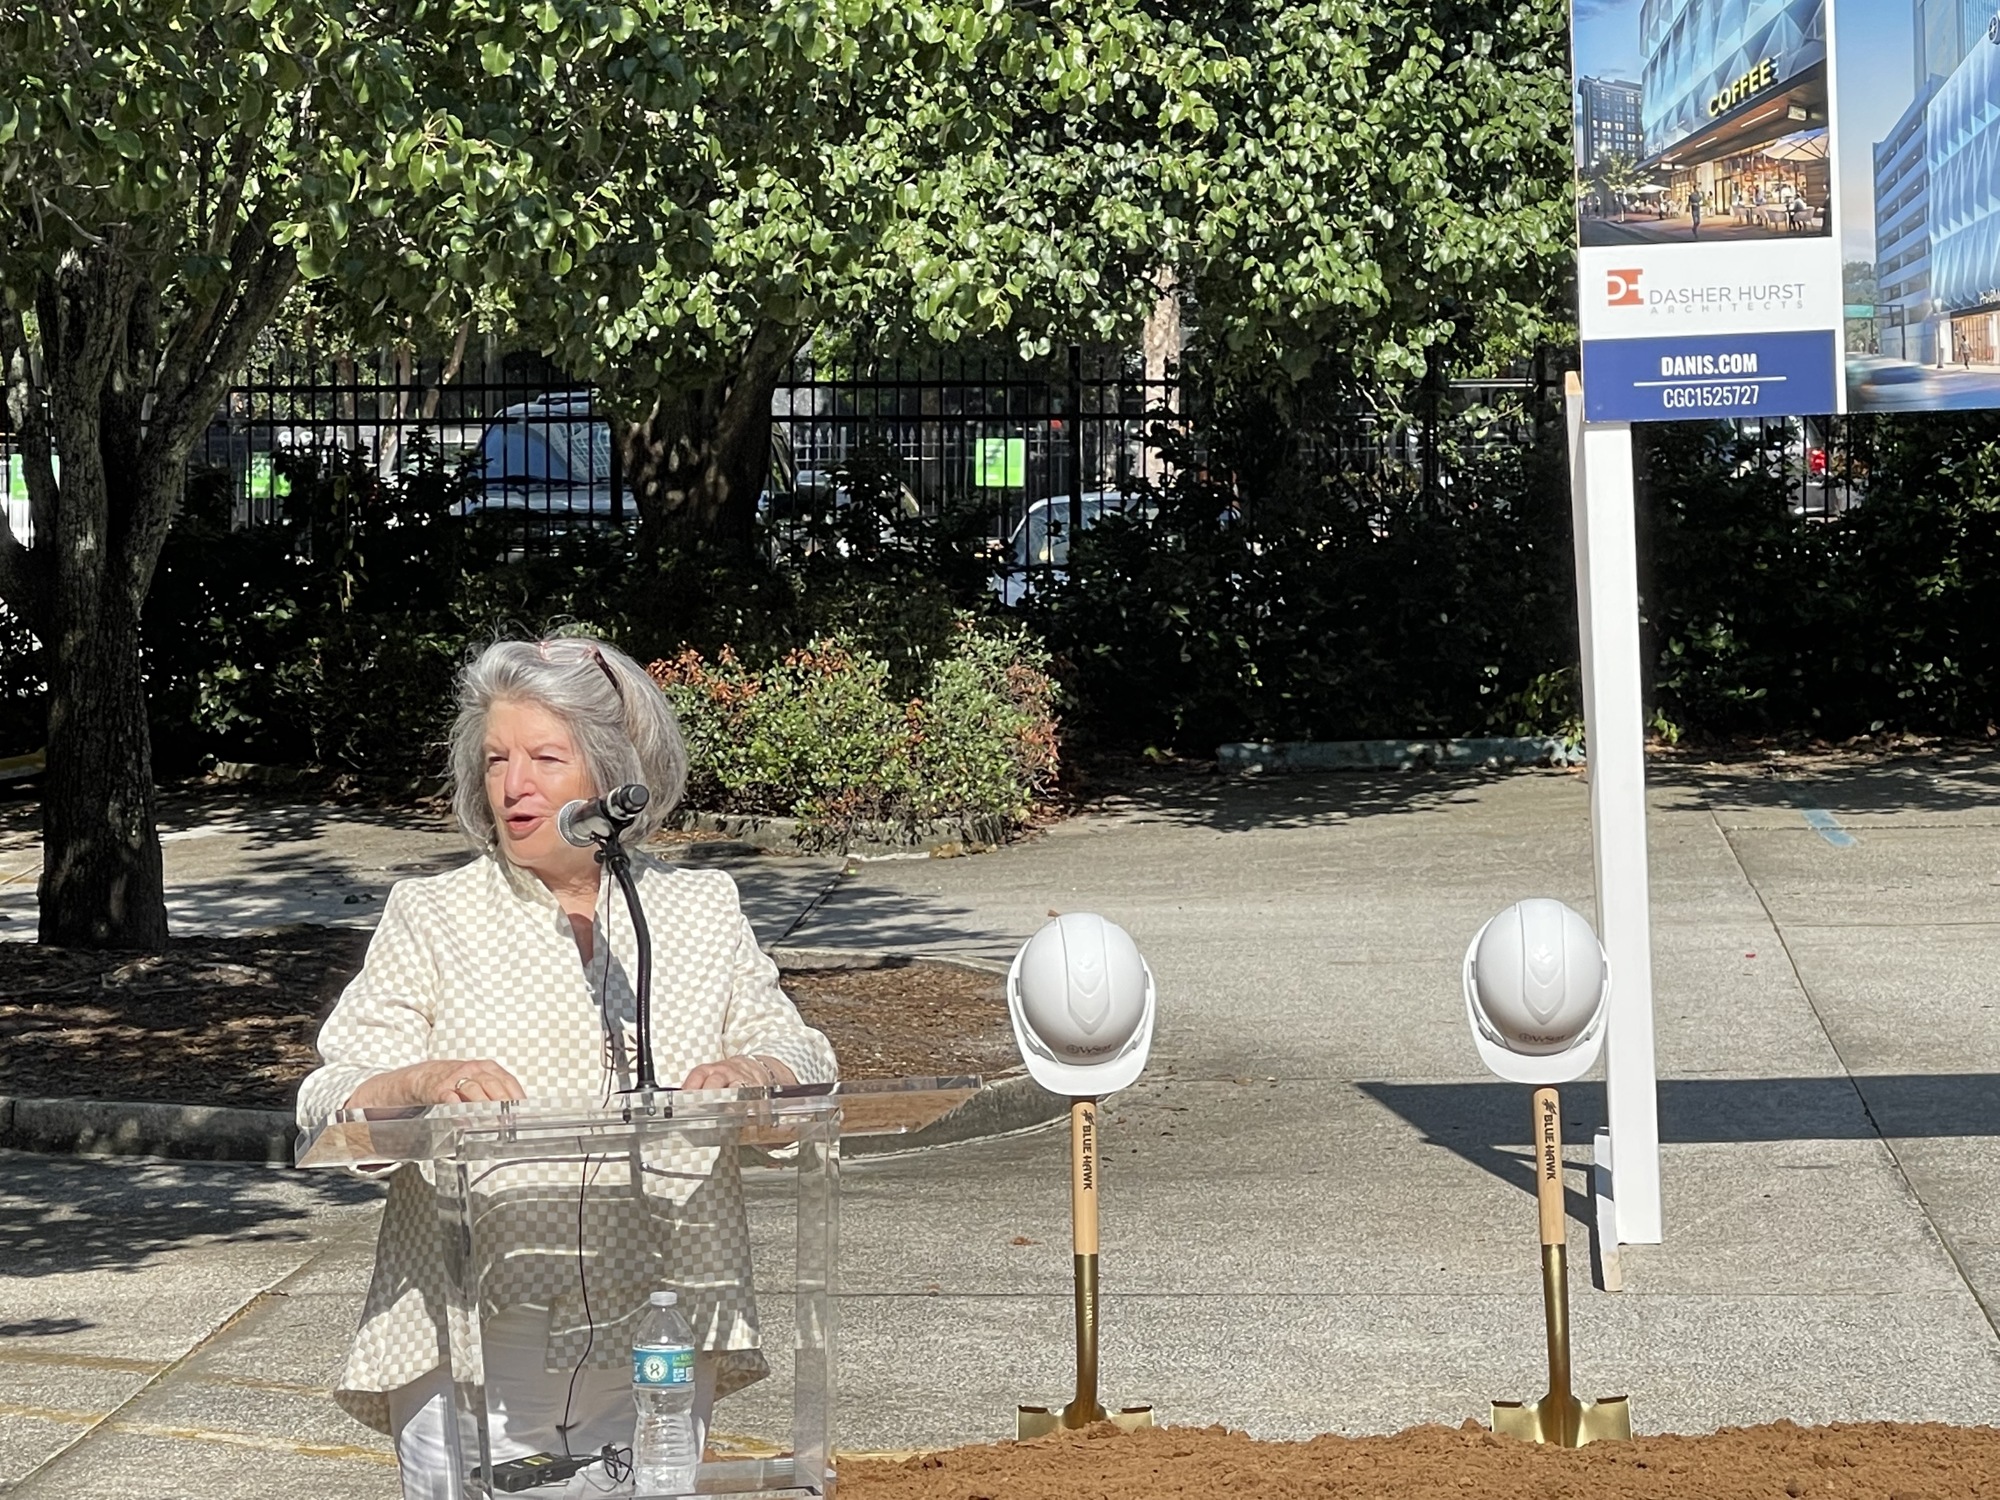 Downtown Investment Authority CEO Lori Boyer speaks at the groundbreaking.